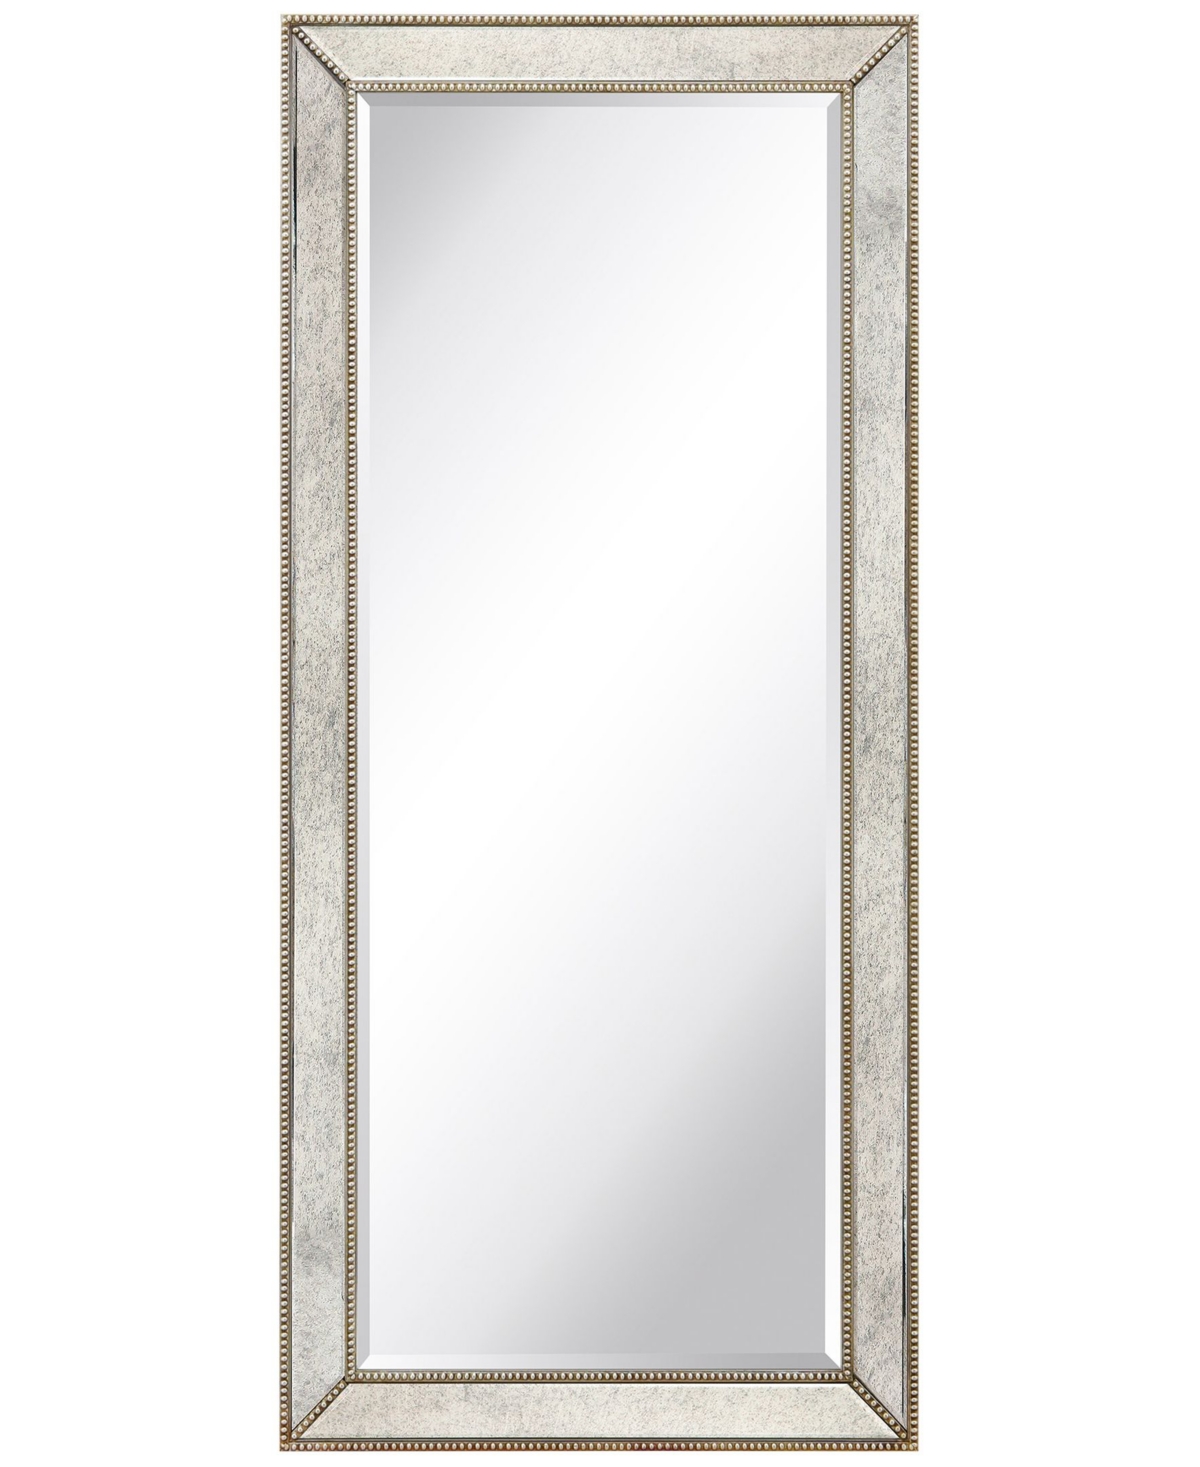 Solid Wood Frame Covered with Beveled Antique Mirror Panels - 24" x 54" - Champagne